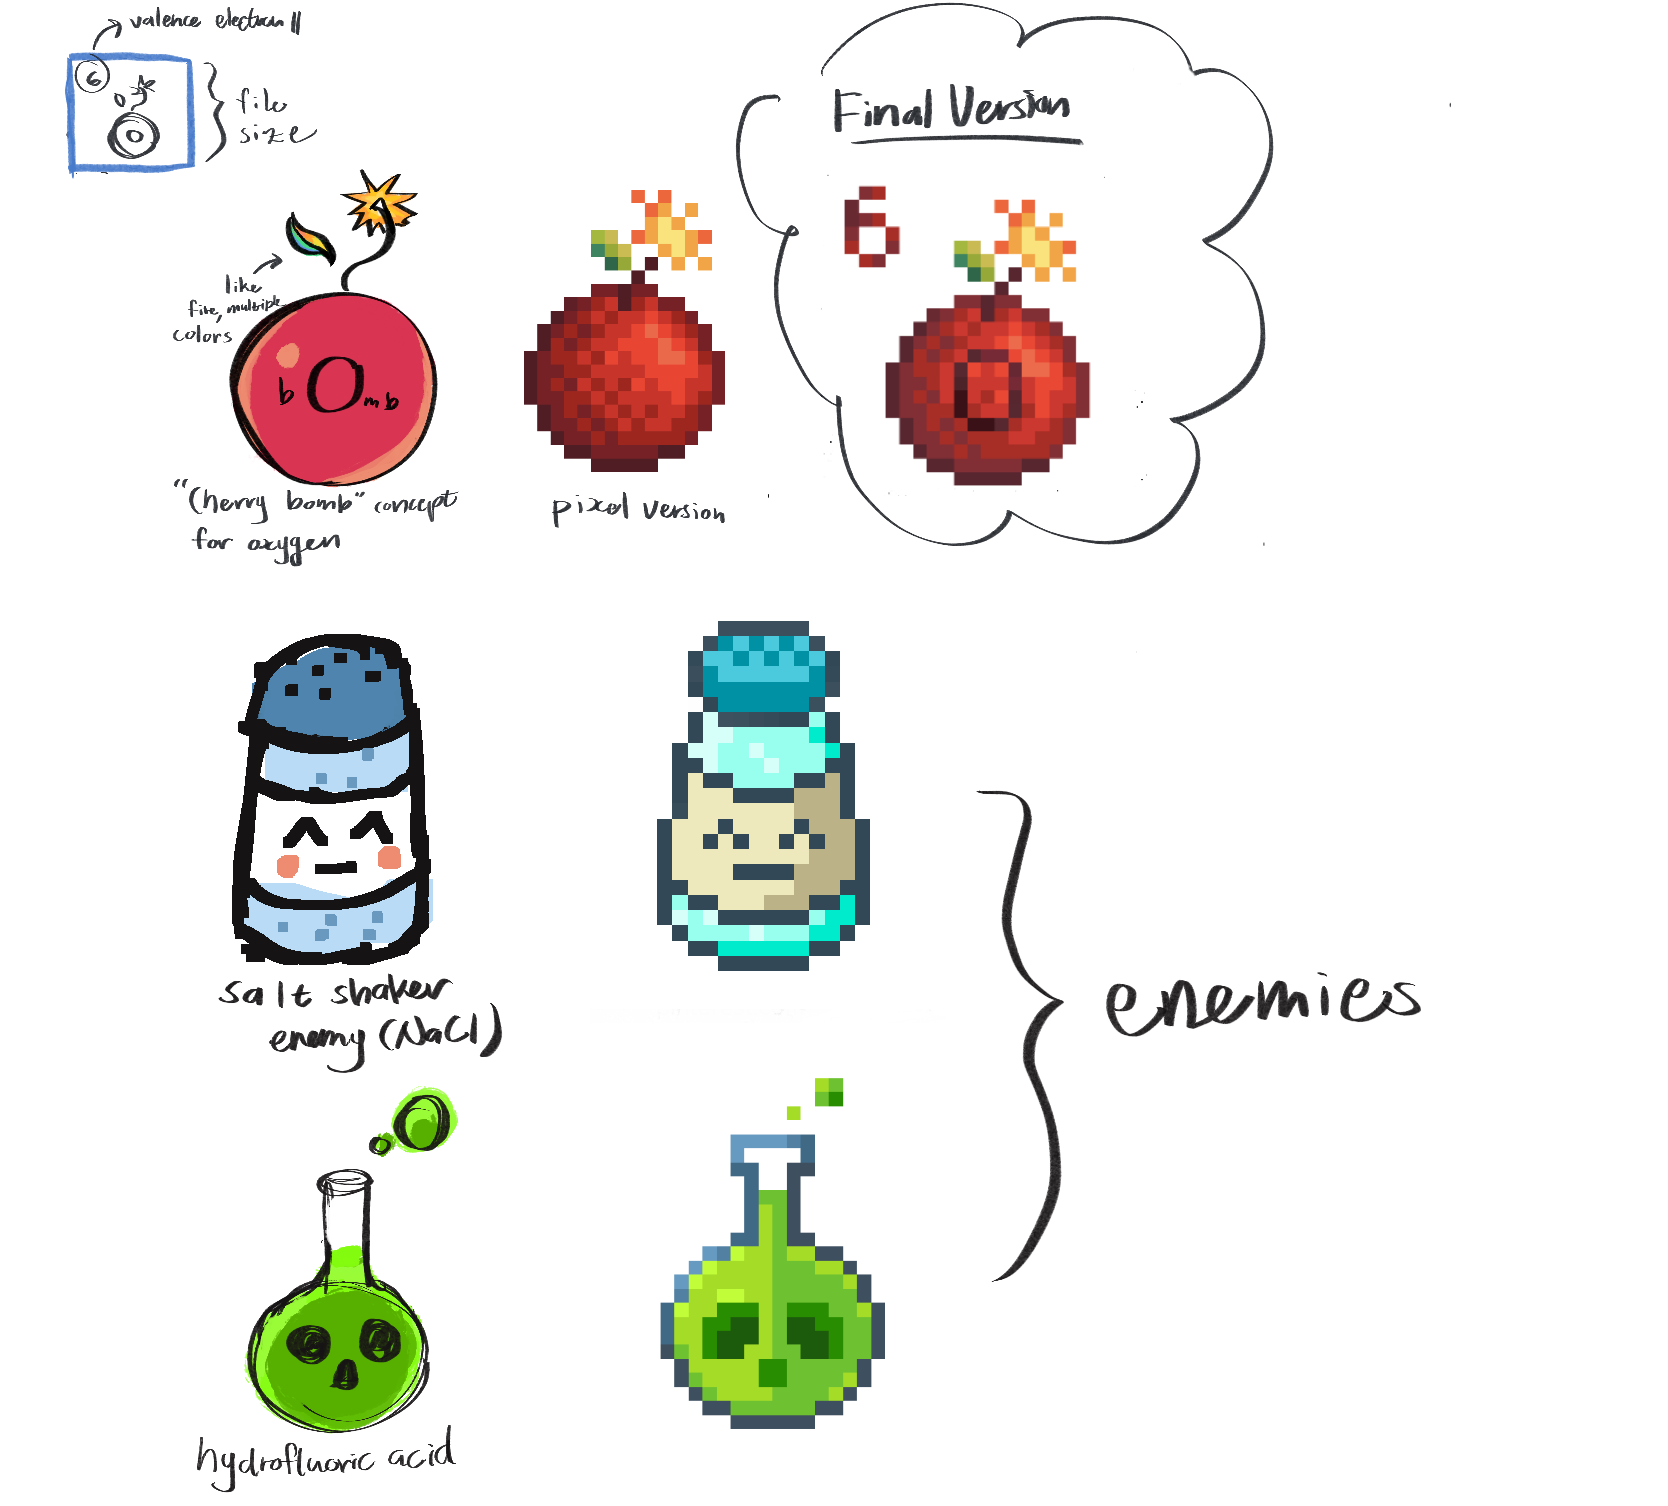 In order: Sketch of a cherry bomb with with word 'bomb' on it, with a larger 'O'. Pixel art version of same cherry bomb, with and without the 'O' and the number 6. Sketch of a salt shaker with a cute face on it, and the pixel version of it. Labeled 'salt shaker enemy (NaCl)'. Sketch of a flask of green acidic liquid and its pixel variant. Labeled 'hydrofluoric acid'. 